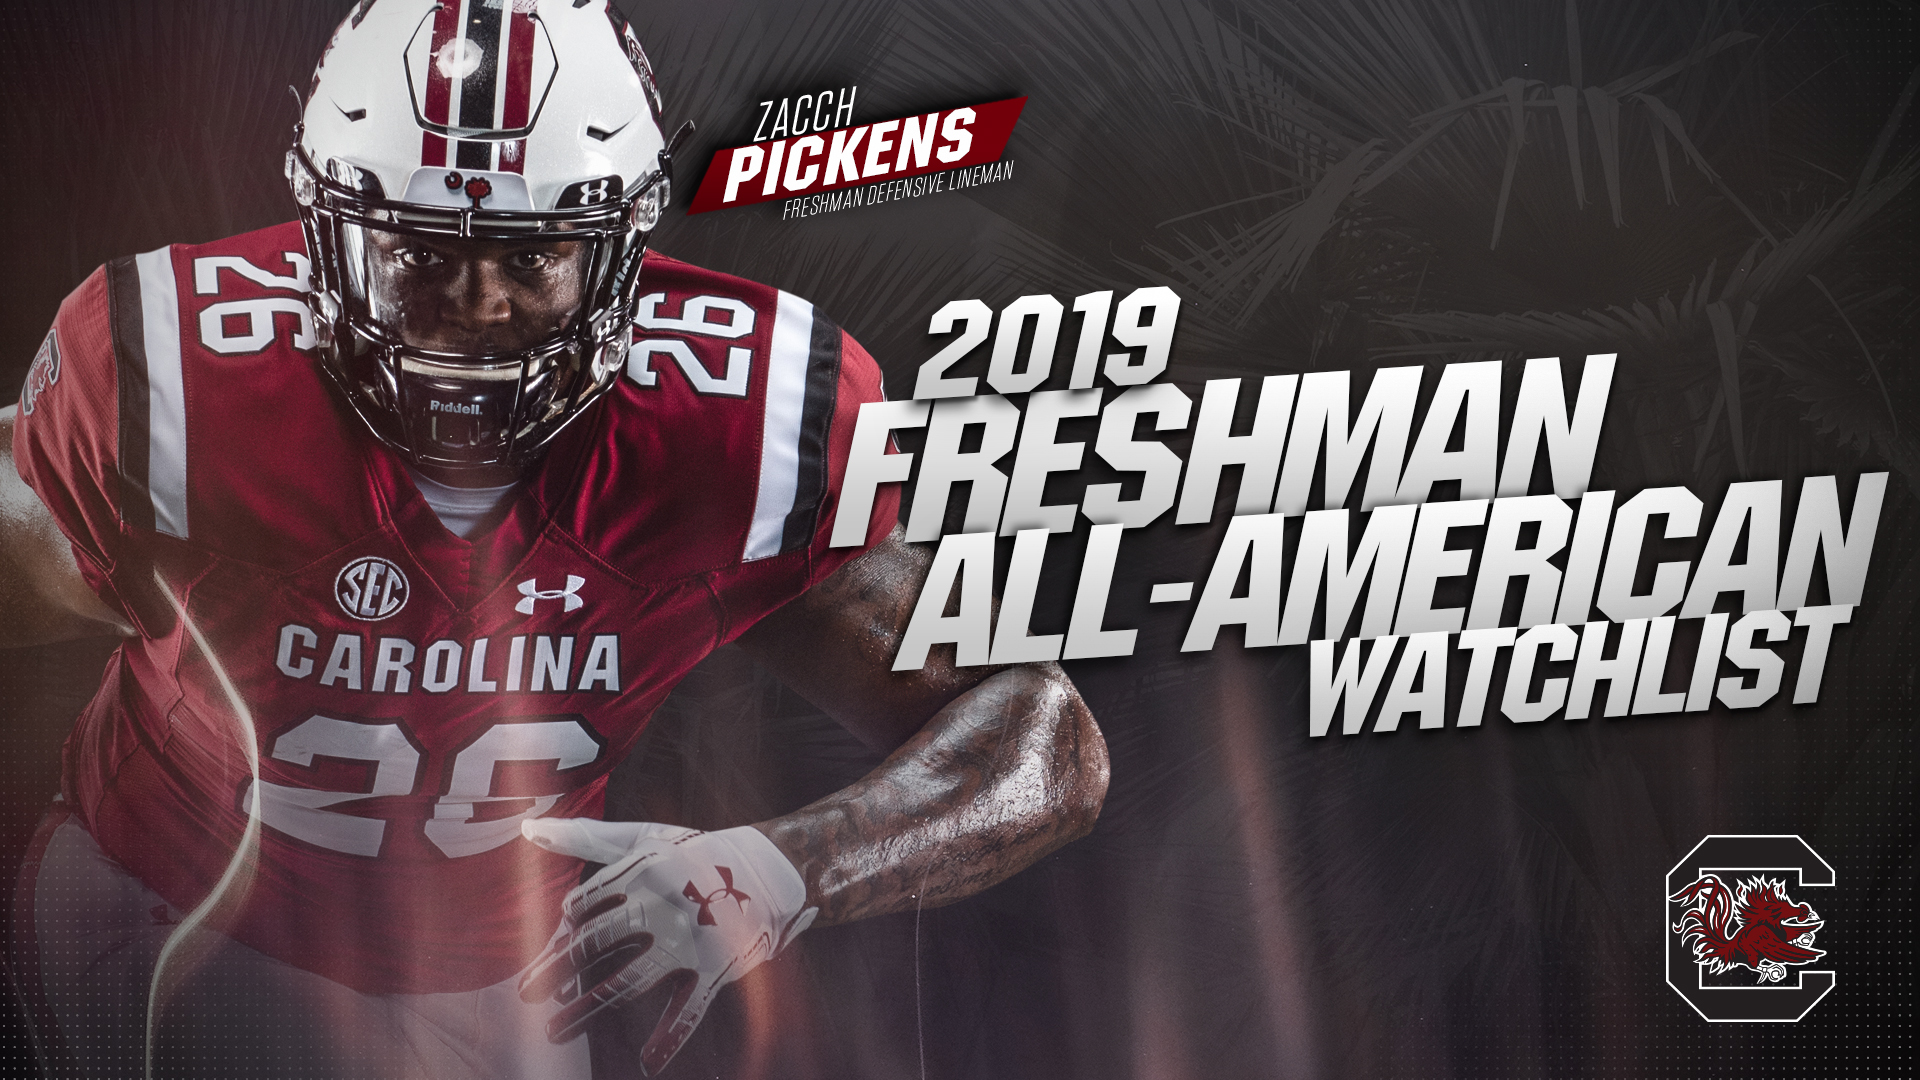 Pickens Named to FWAA Freshman All-American Watch List